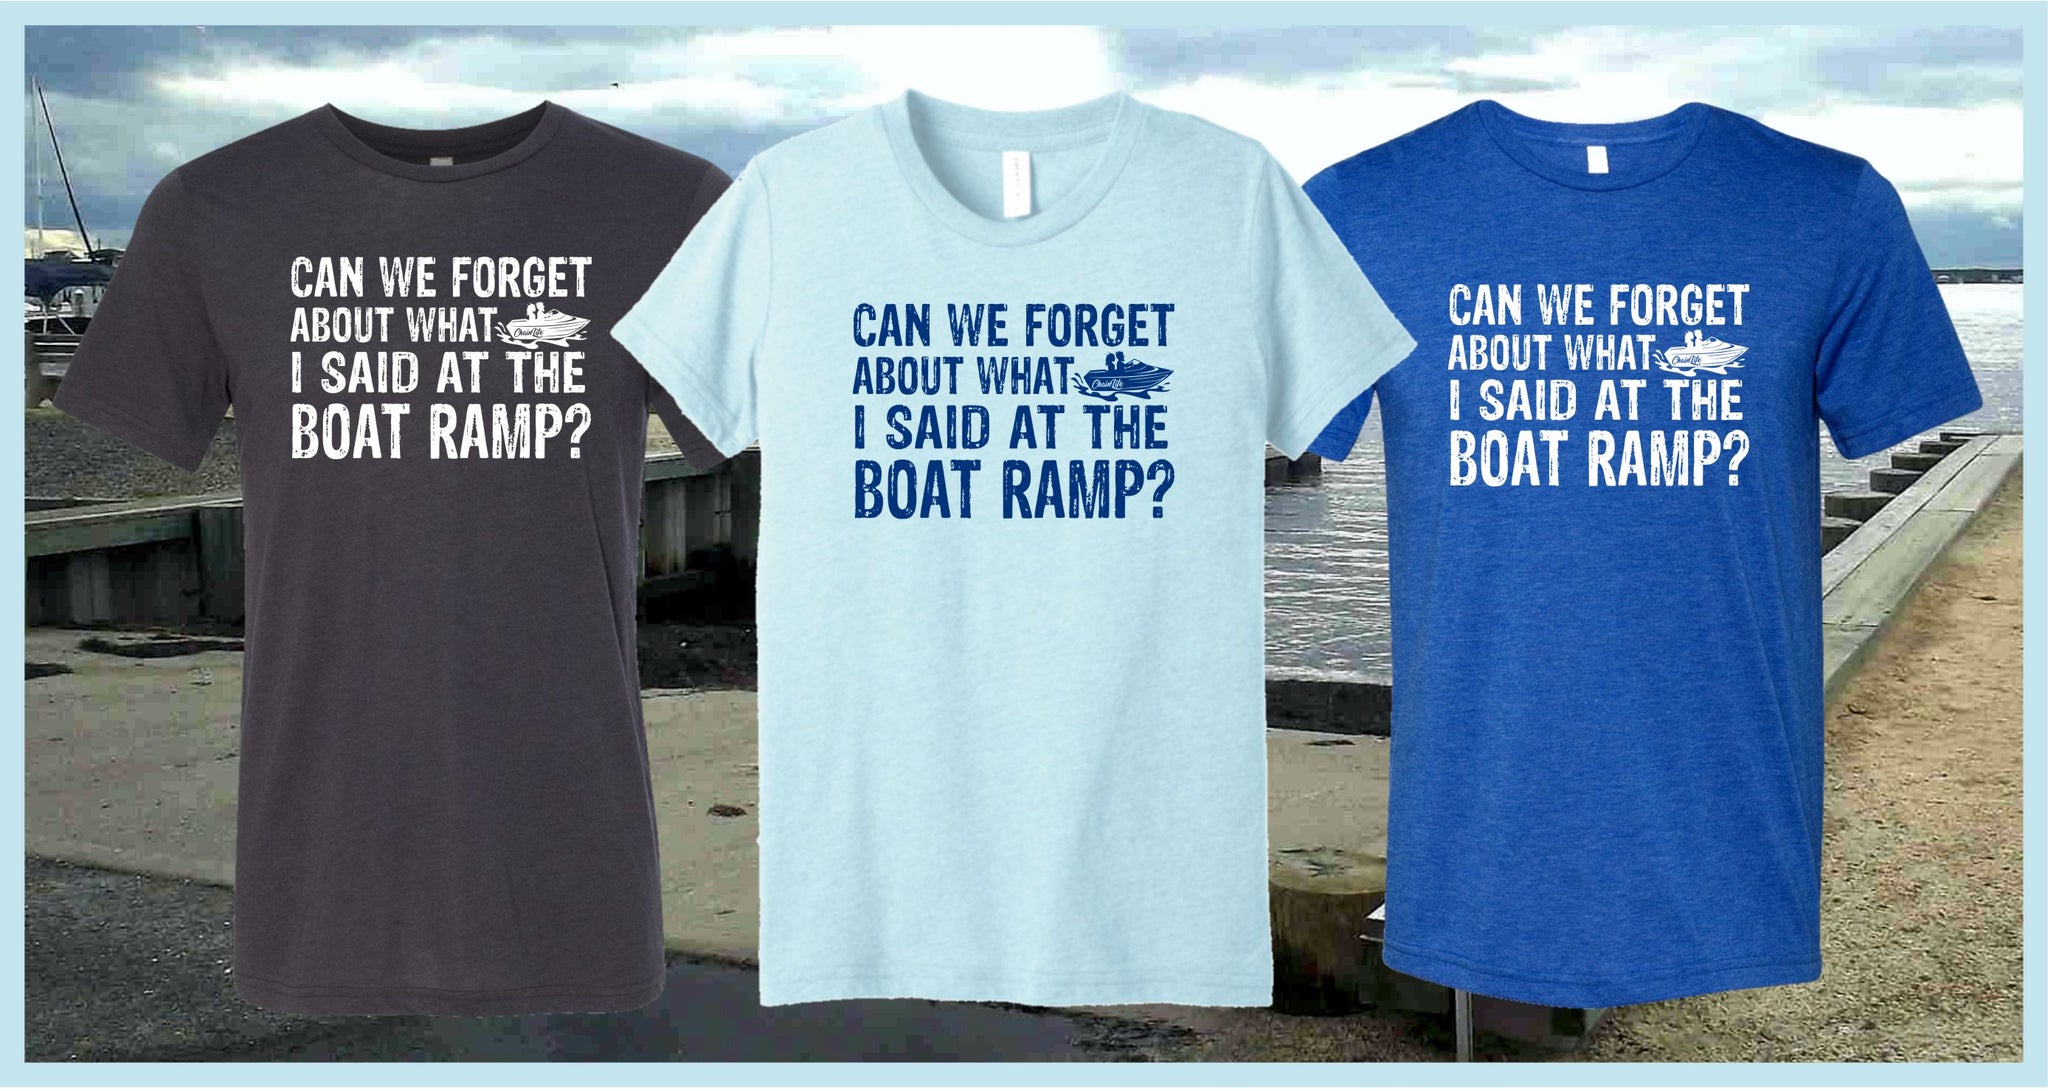 CAN WE FORGET ABOUT WHAT I SAID AT THE BOAT RAMP? Unisex T-shirt